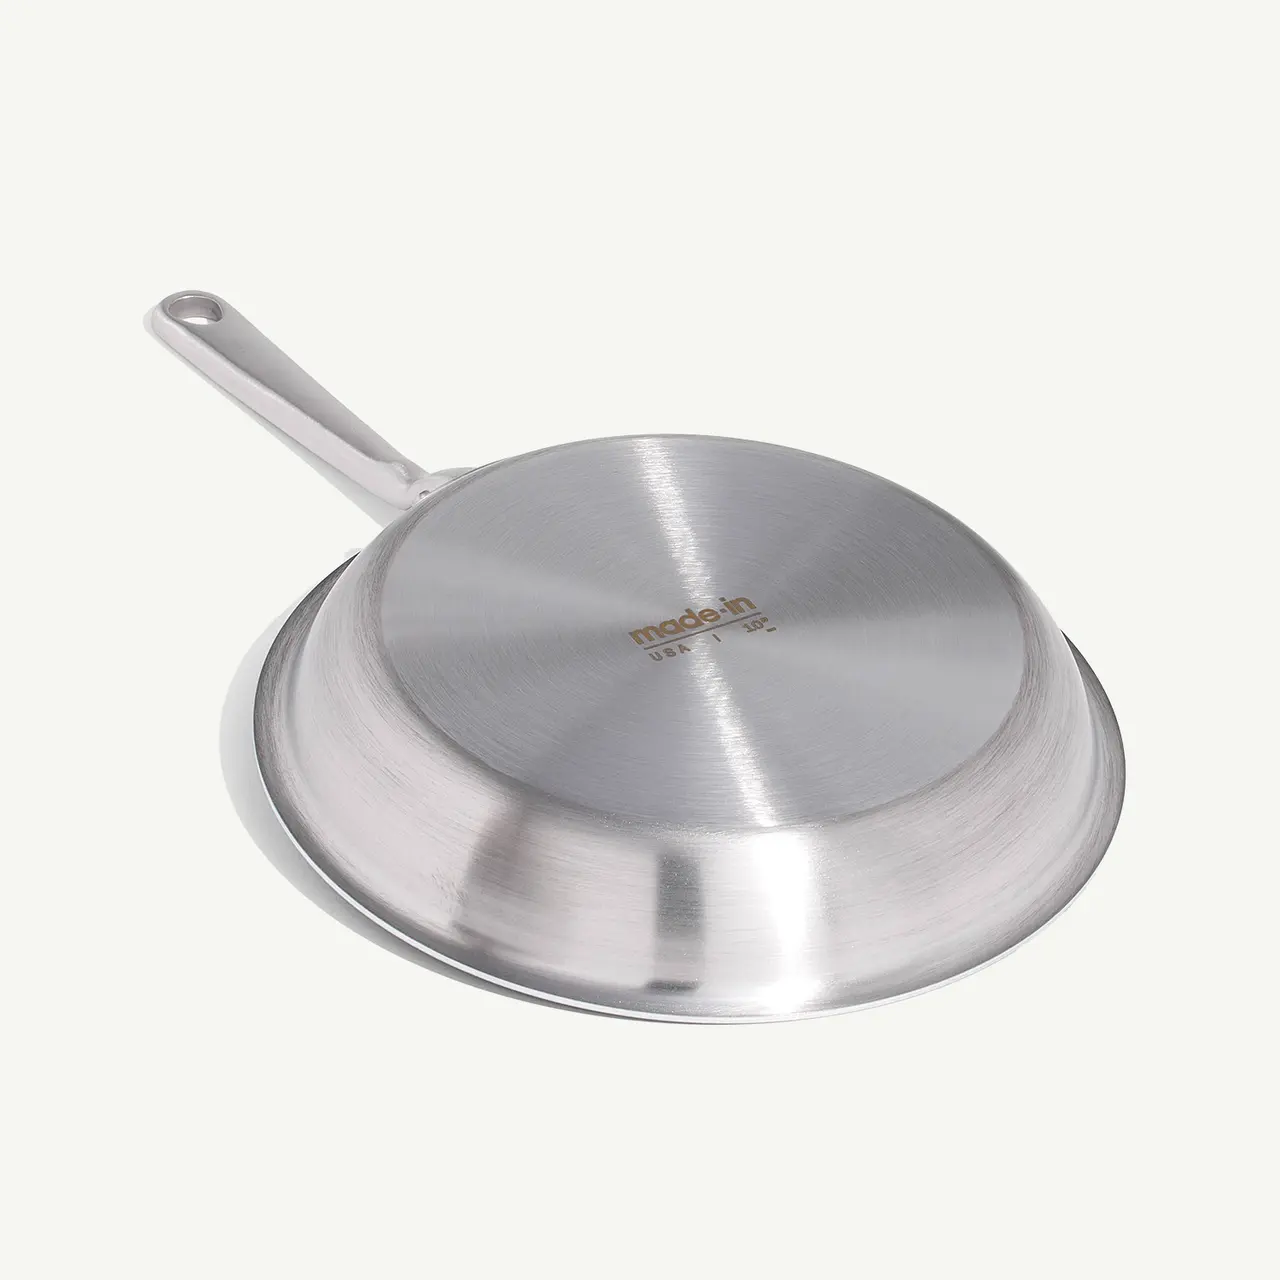 A stainless steel frying pan is displayed with its bottom facing up, showing the manufacturer's logo.